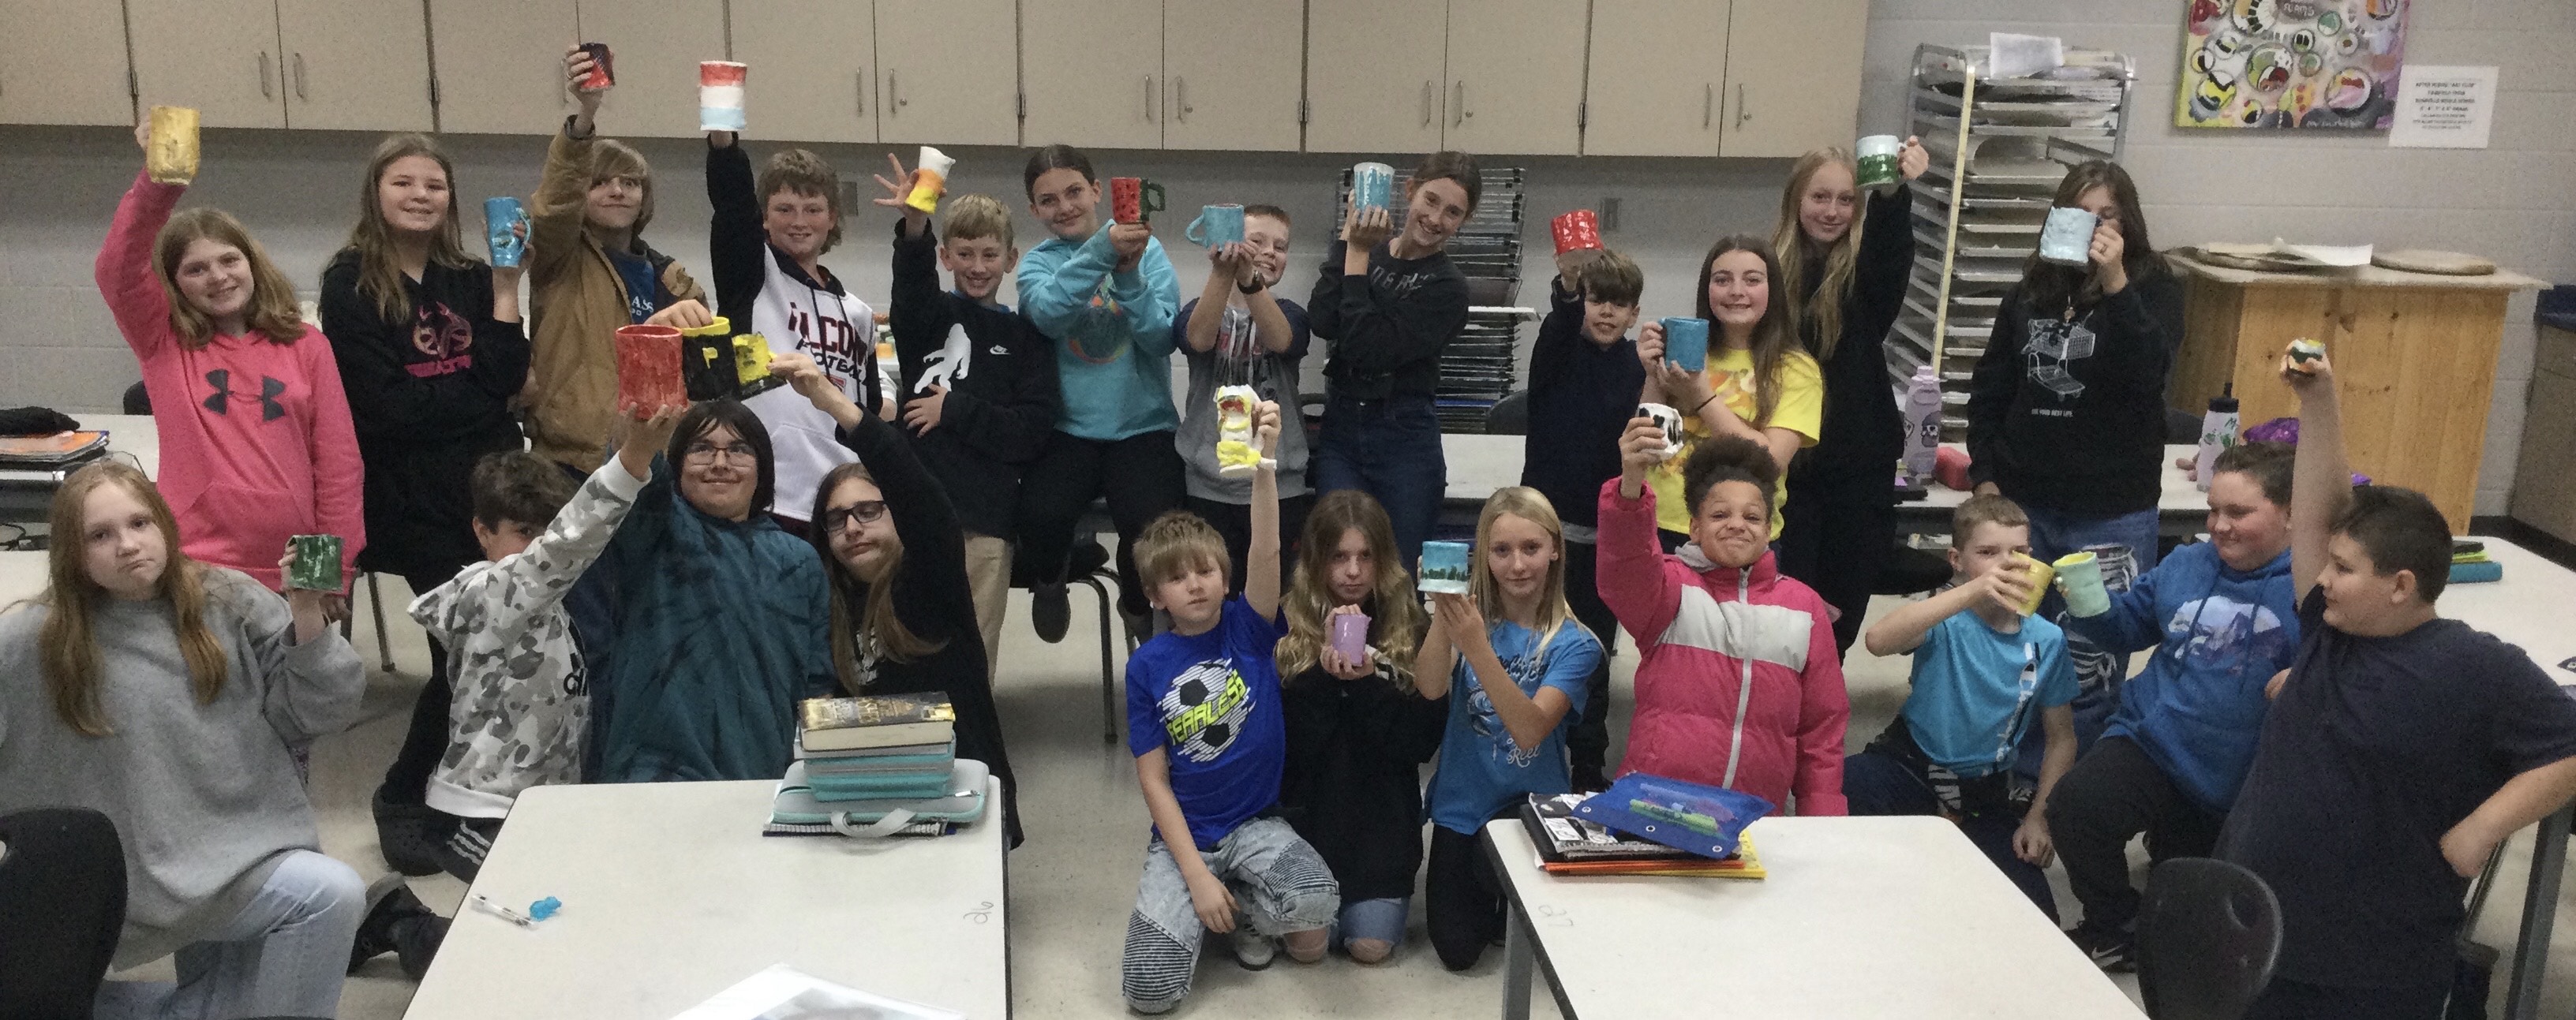 Classroom photo of students holding their mugs